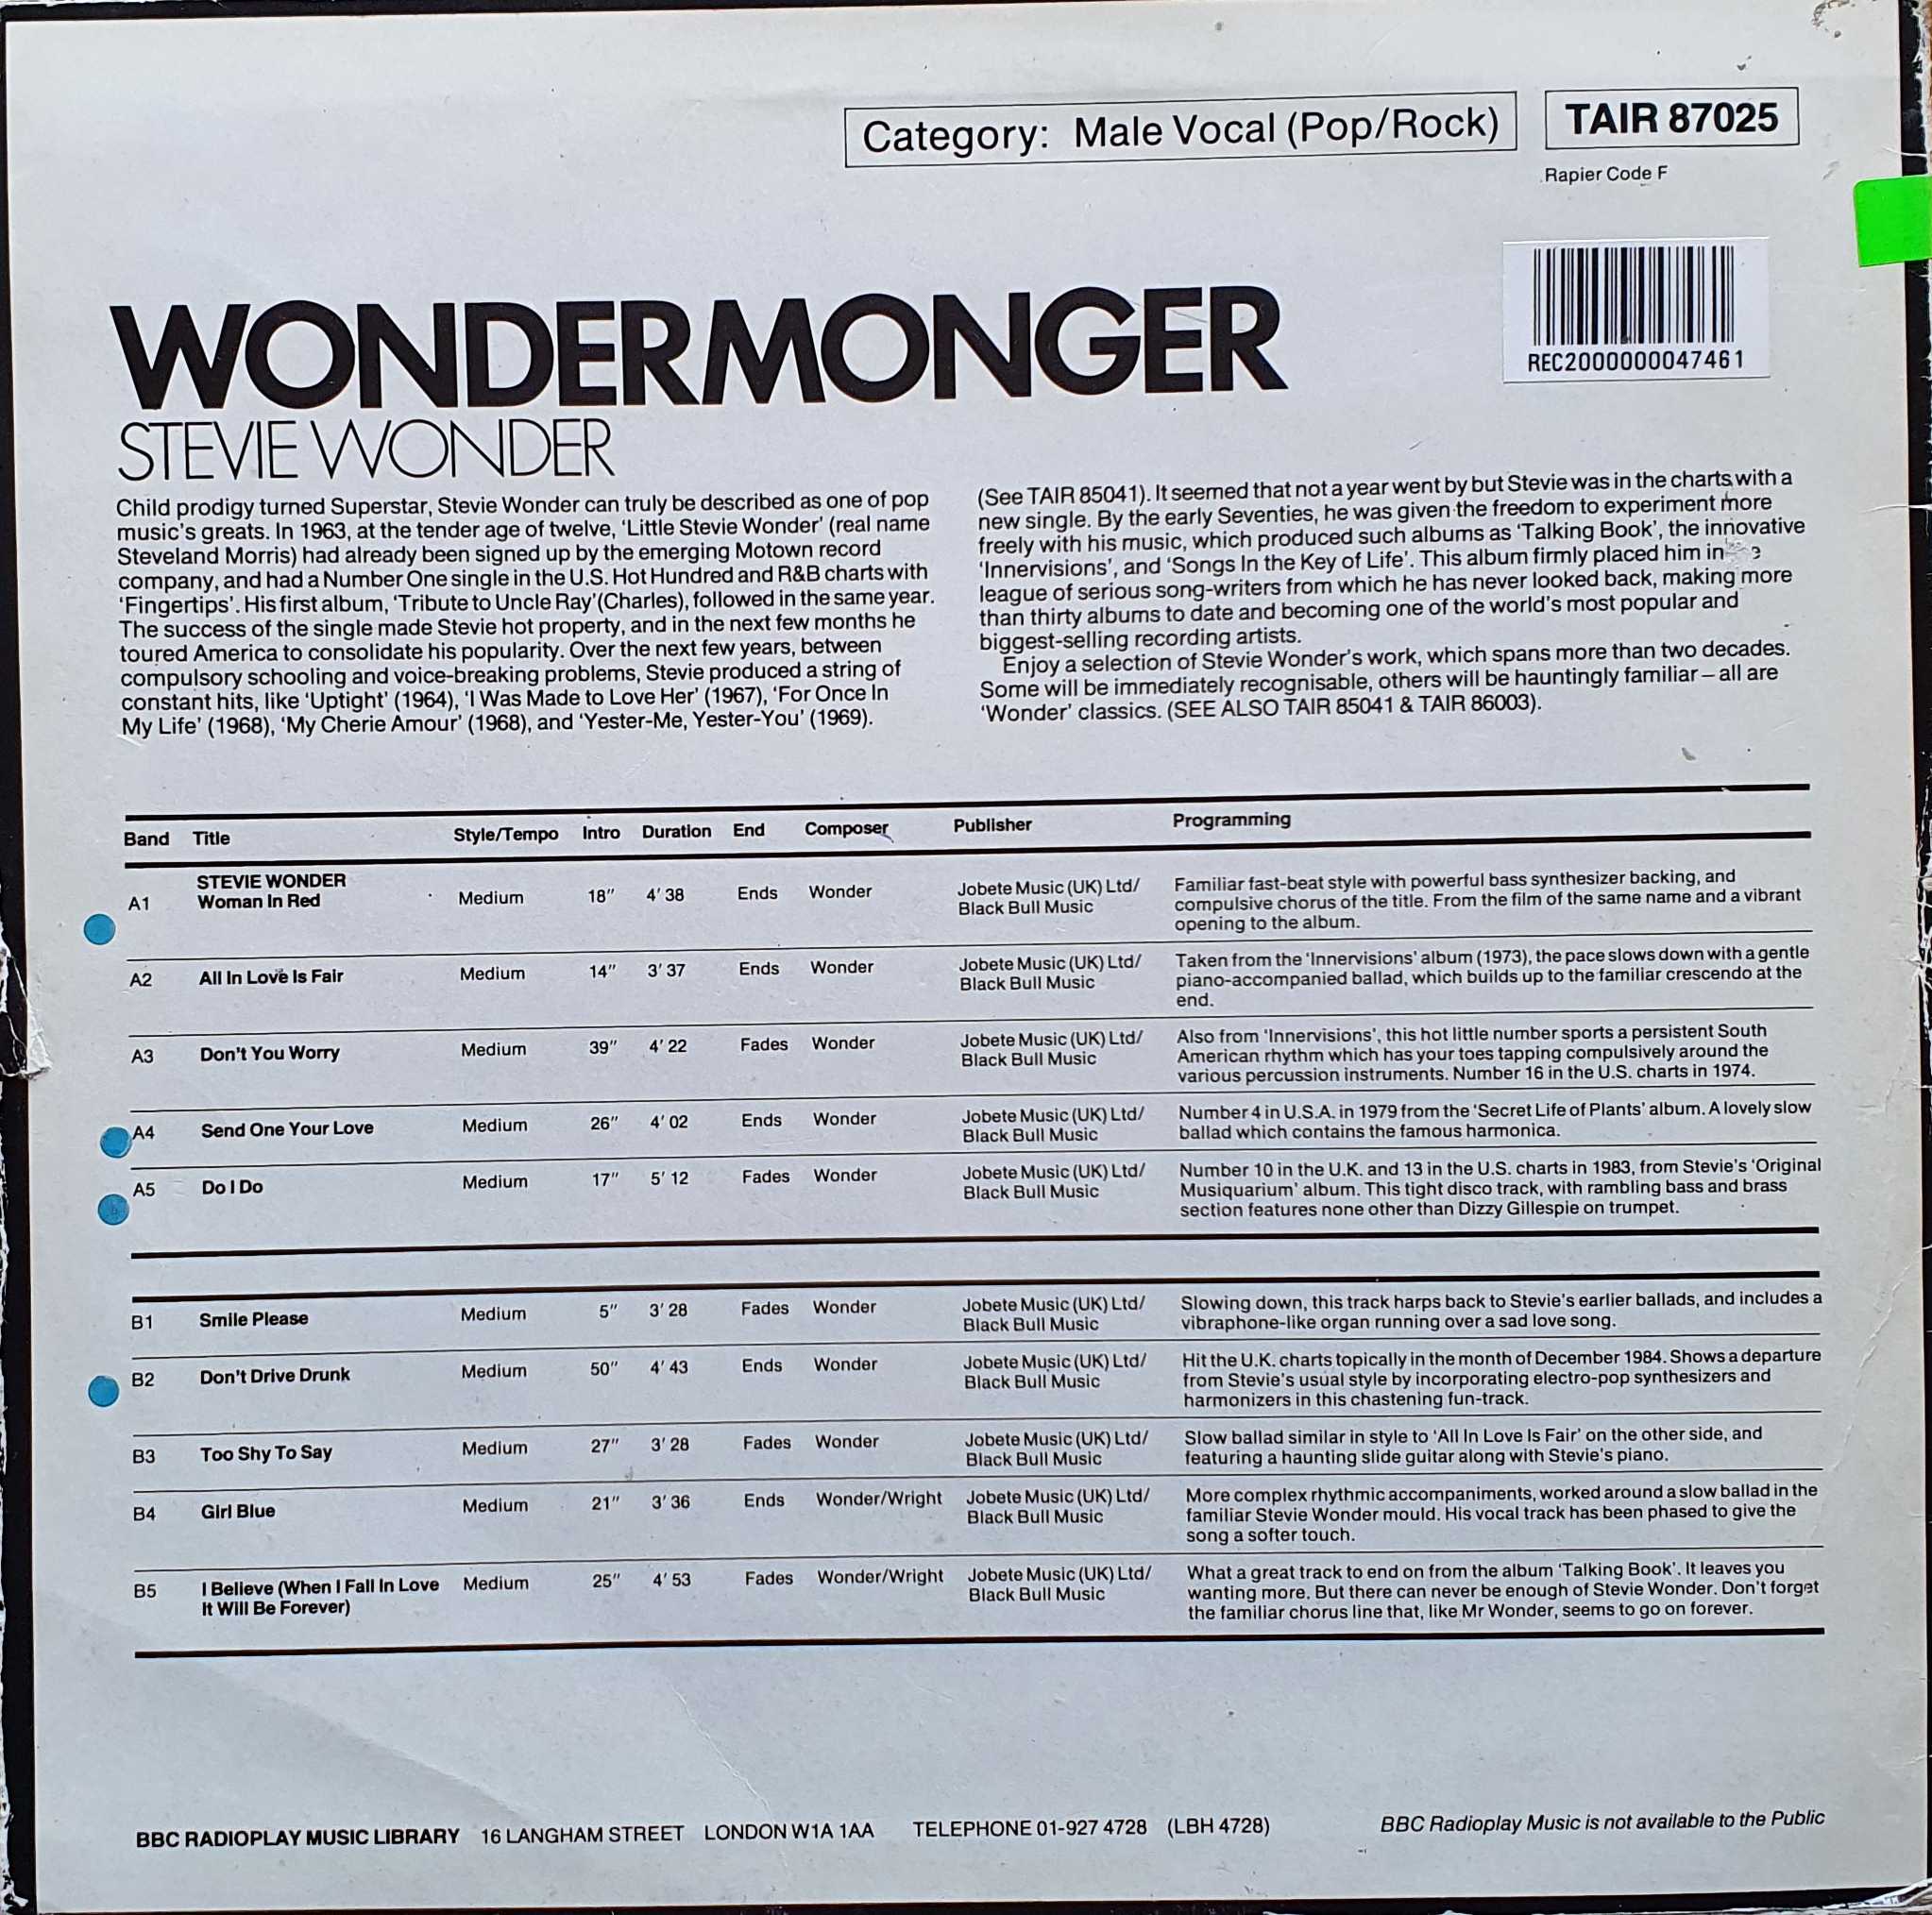 Picture of TAIR 87025 Wonder monger by artist Stevie Wonder from the BBC records and Tapes library